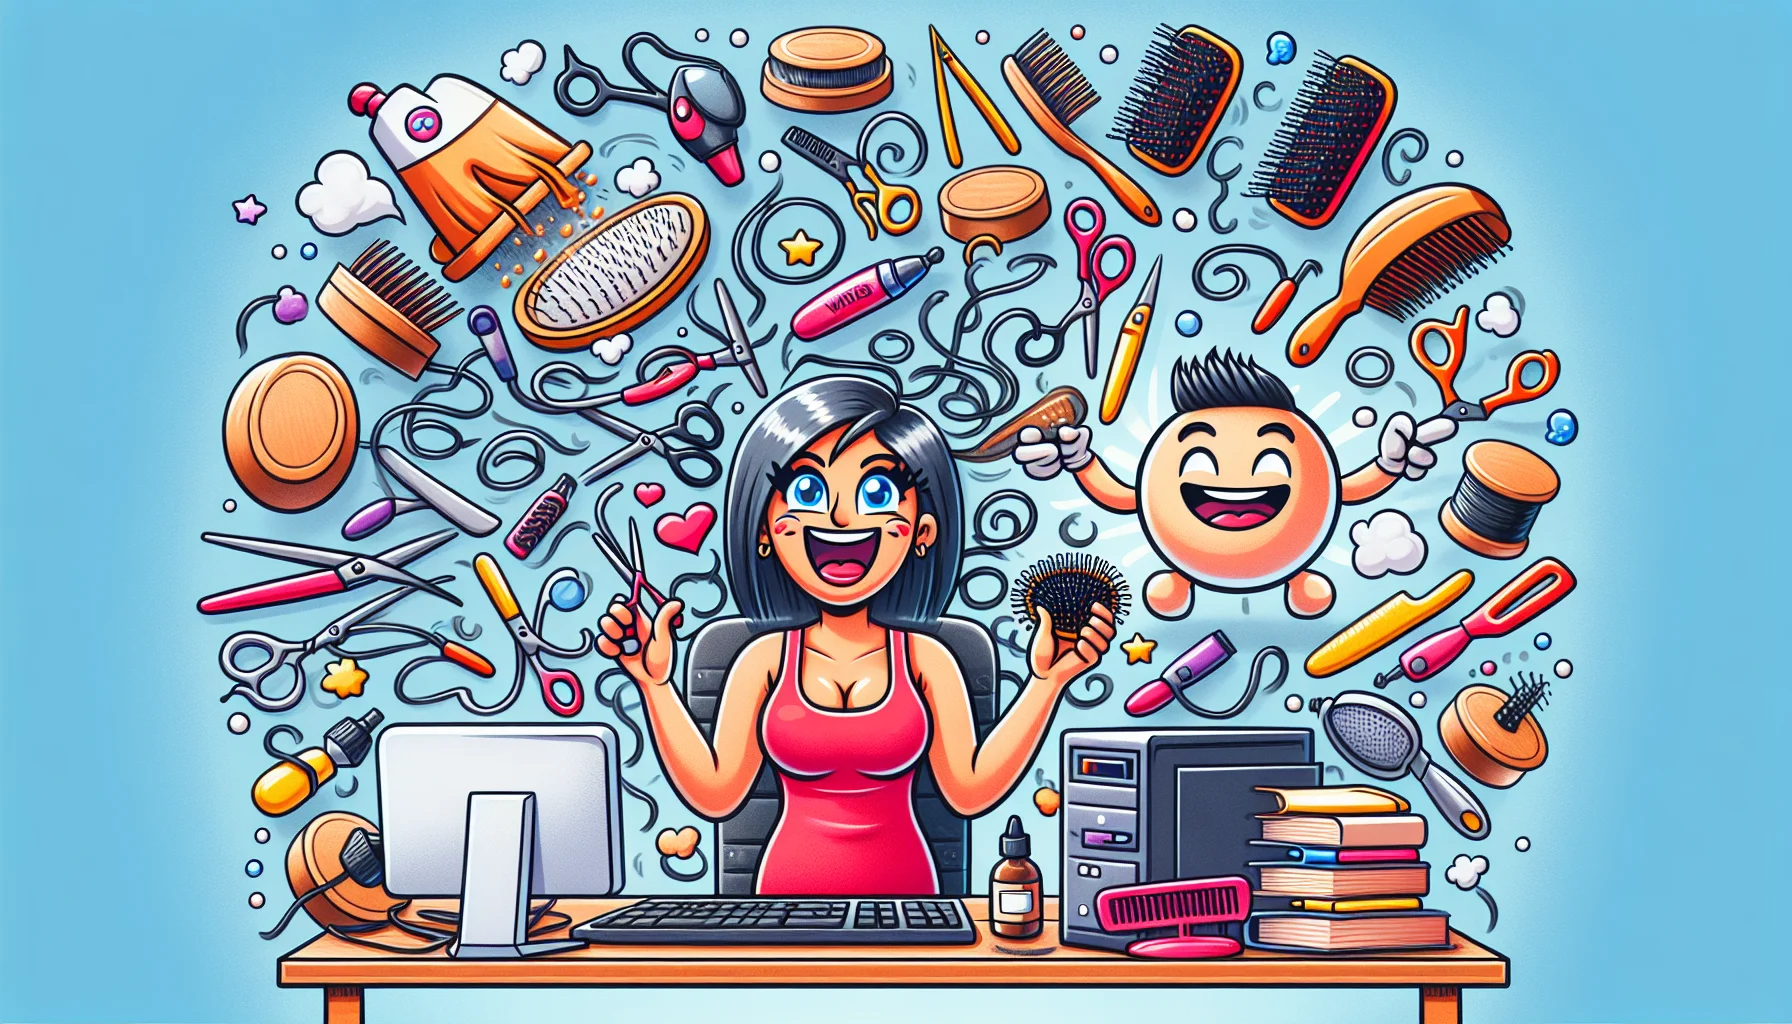 Depict a comical scenario where a busy web designer, creative, Hispanic woman is surrounded by a flurry of quirky hairdressing tools like scissors, hairdryers, and combs flying around, constructing a hair salon themed website. In the corner, a web hosting logo turns into a happy and supportive entity, grinning and giving a thumbs up. This funny twist on web development shows the process of building a salon website subtly highlighting the easiness and efficiency it can bring to their business.